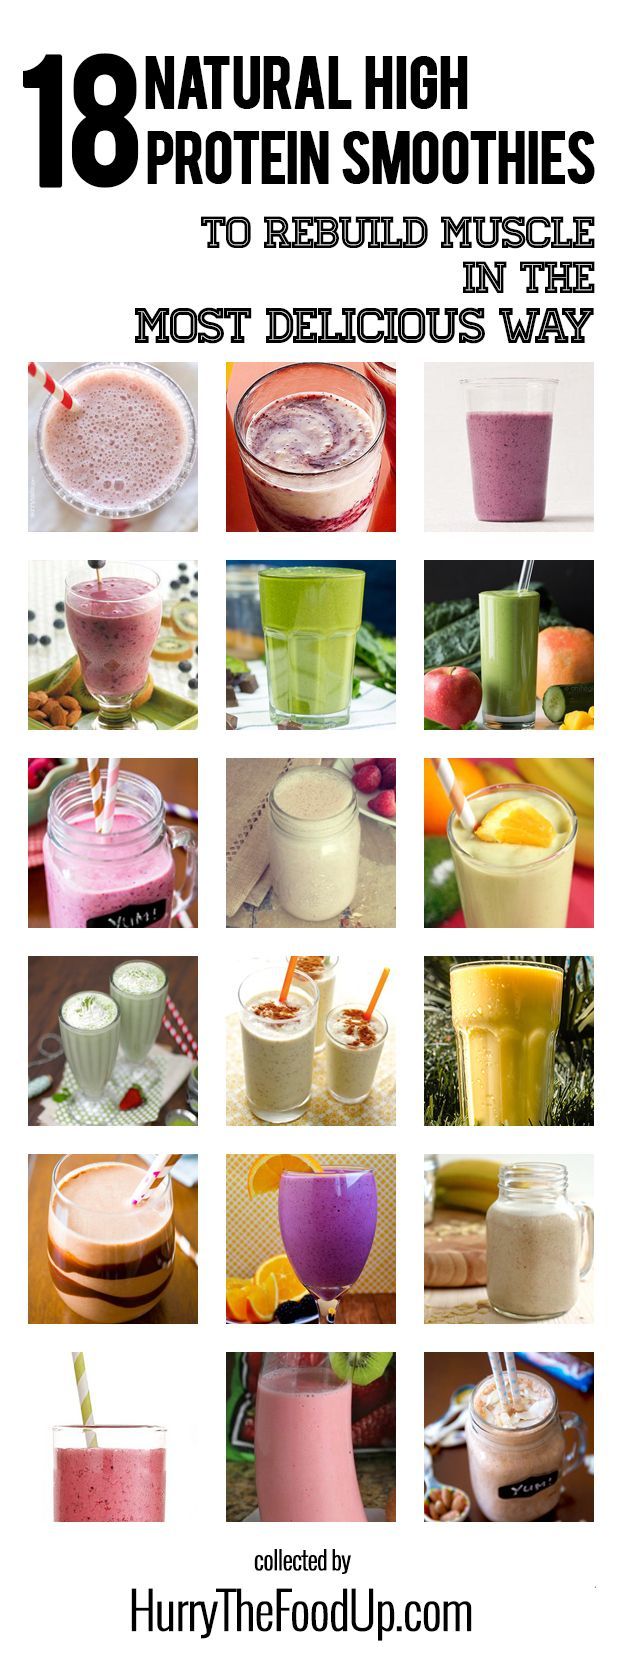 18 Natural High Protein Smoothies -   18 healthy recipes Smoothies protein shakes ideas